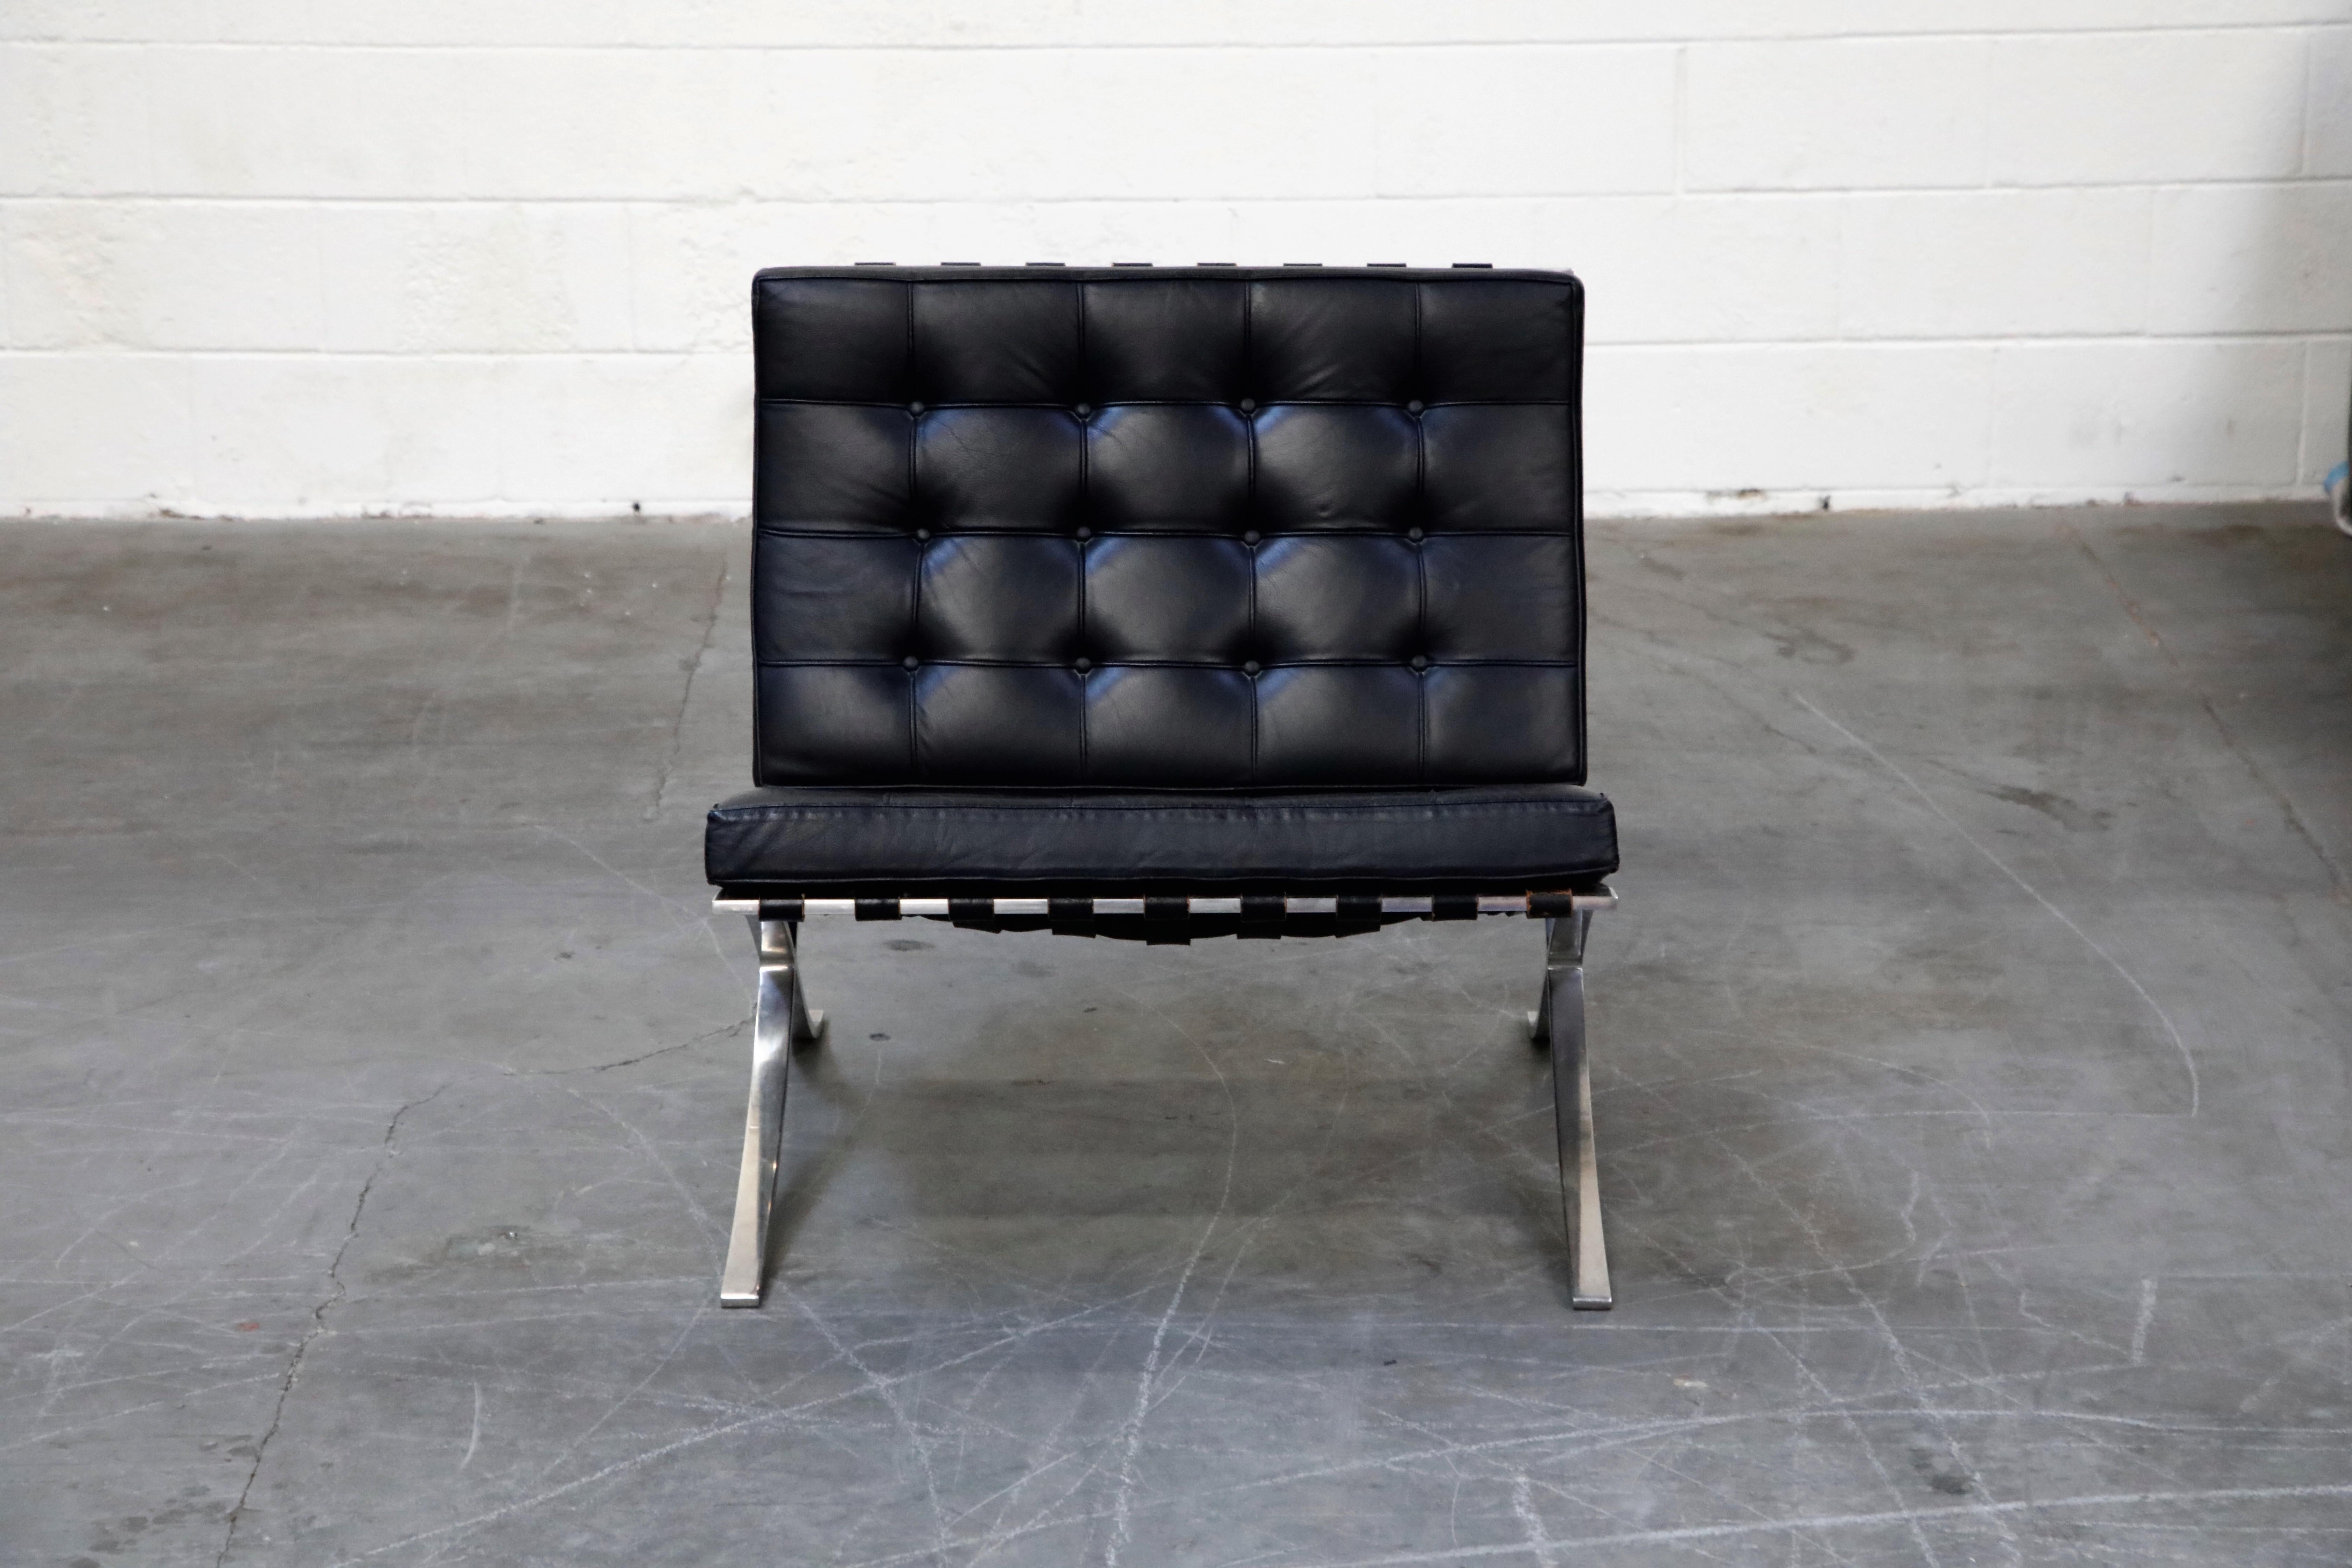 This listing is for a highly sought-after-by-collectors pair (2) of Triple Signed 1st-Generation Knoll Associates Barcelona chairs by Ludwig Mies van der Rohe, circa 1961 in original black leather and matching original black leather straps. 

Being